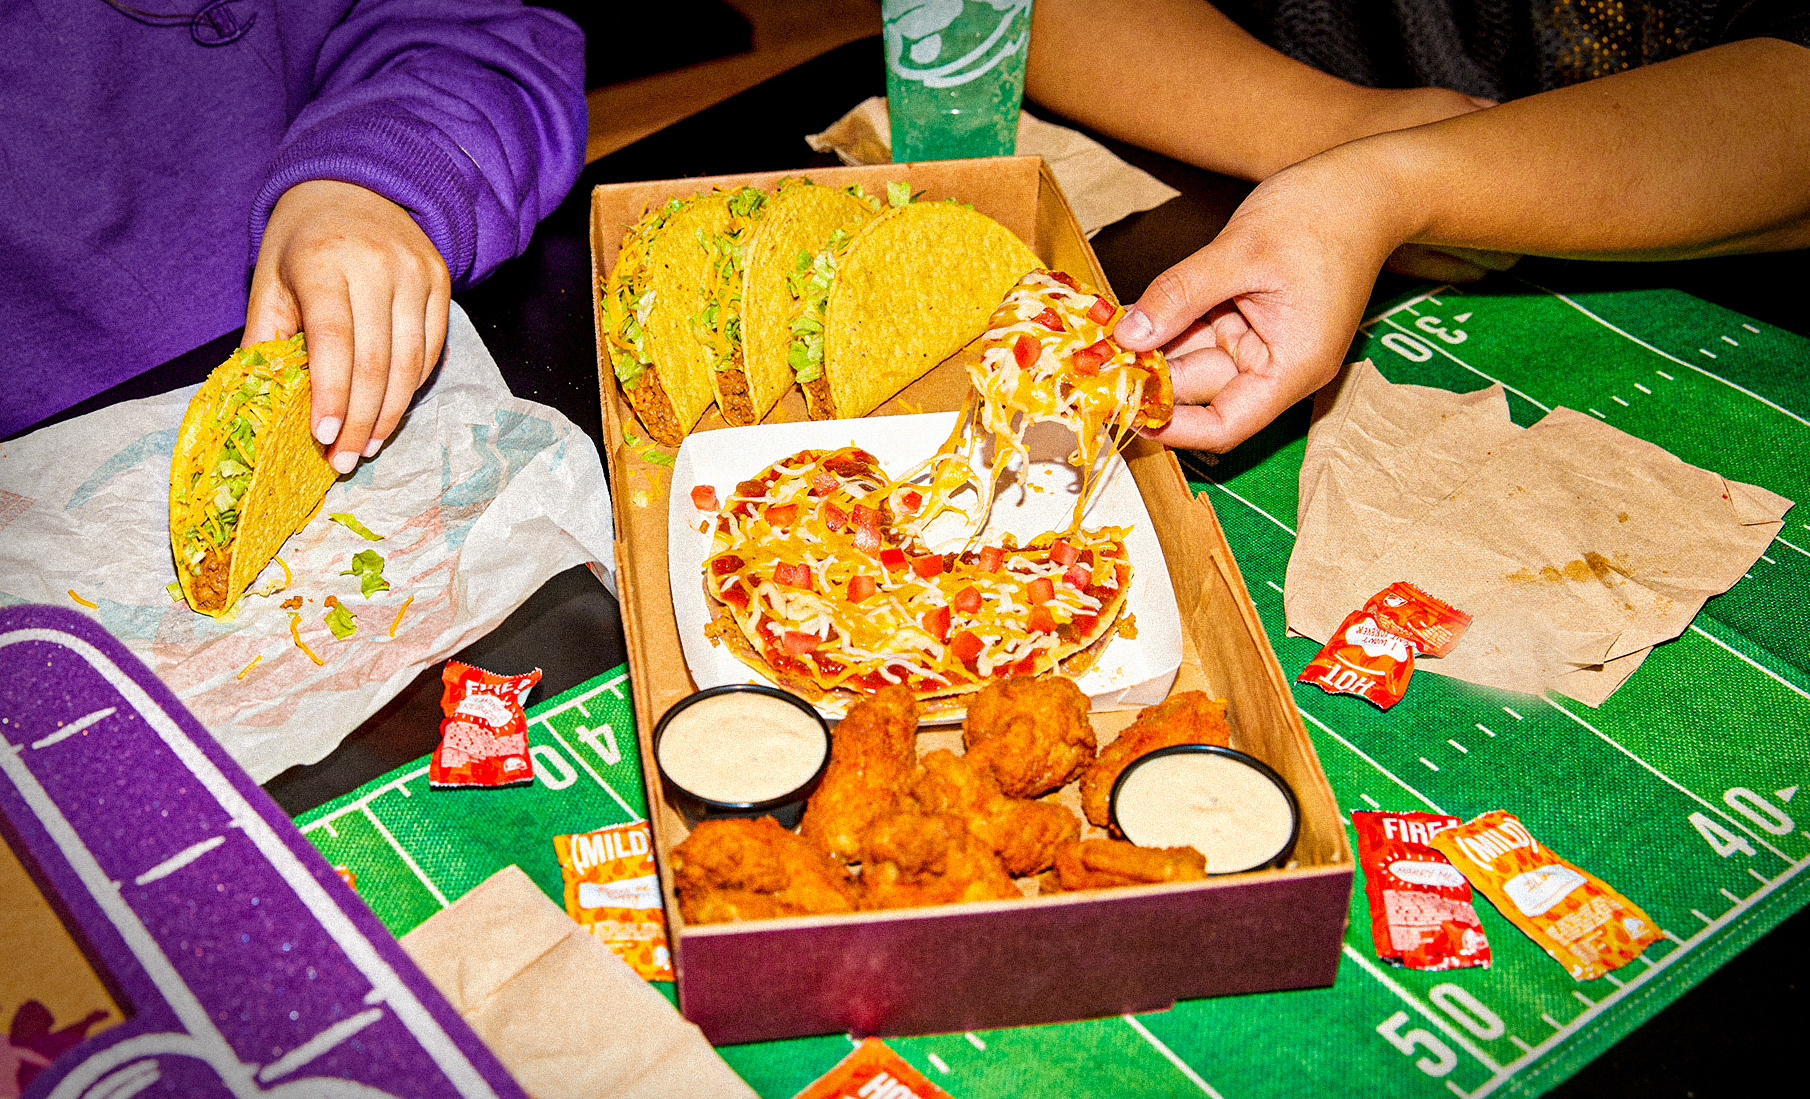 PHOTO: The Ultimate Game Day Box at taco bell with chicken wings, Mexican pizza and crunchy tacos.